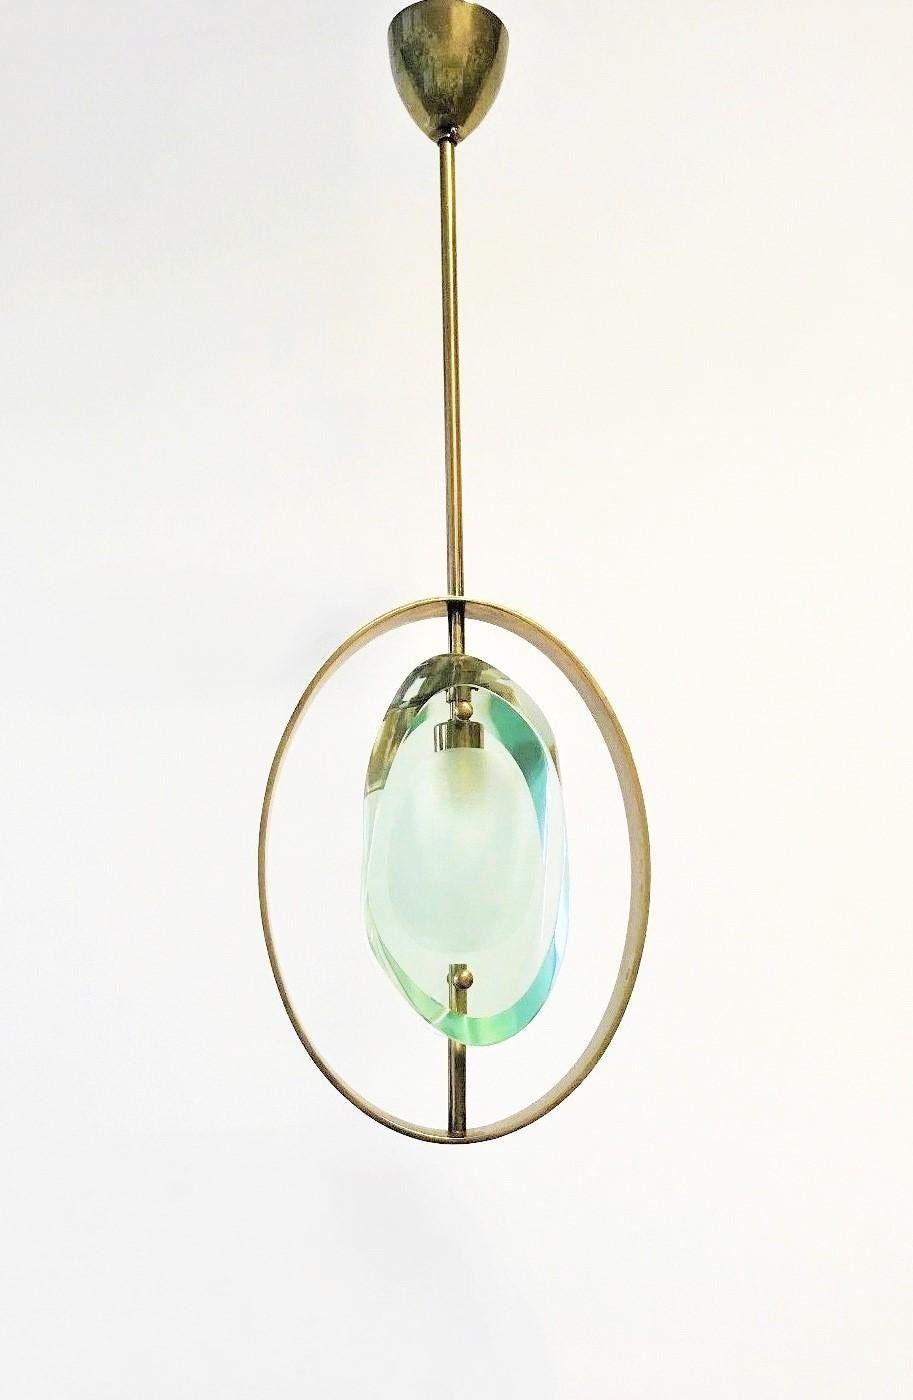 Very elegant pair of pendants by Max Ingrand for Fontana Arte, Model 1933, Italy, 1961. Organically shaped double lens cut panels of thick Murano polished glass with etched glass centers fitted within a natural brass ring suspended from brass